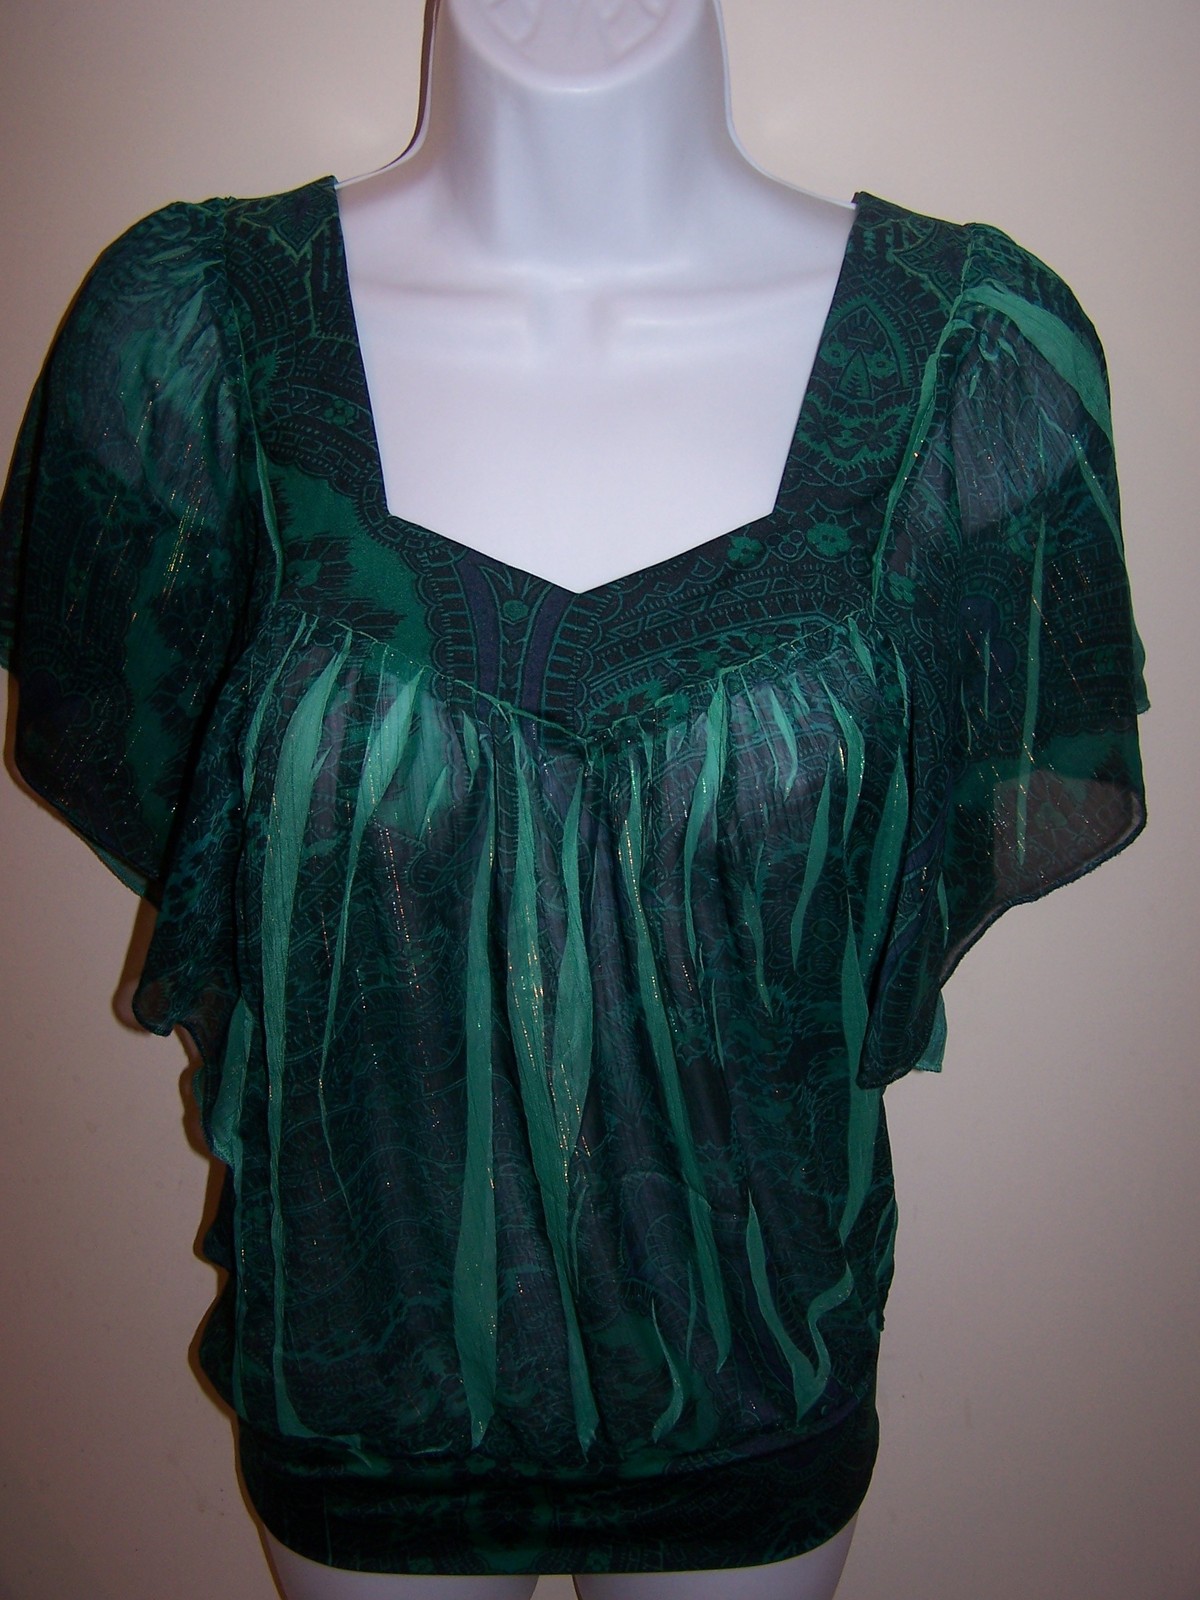 L8ter Women's Blouse S Green Floral Print Semi-Sheer 100% Polyester ...